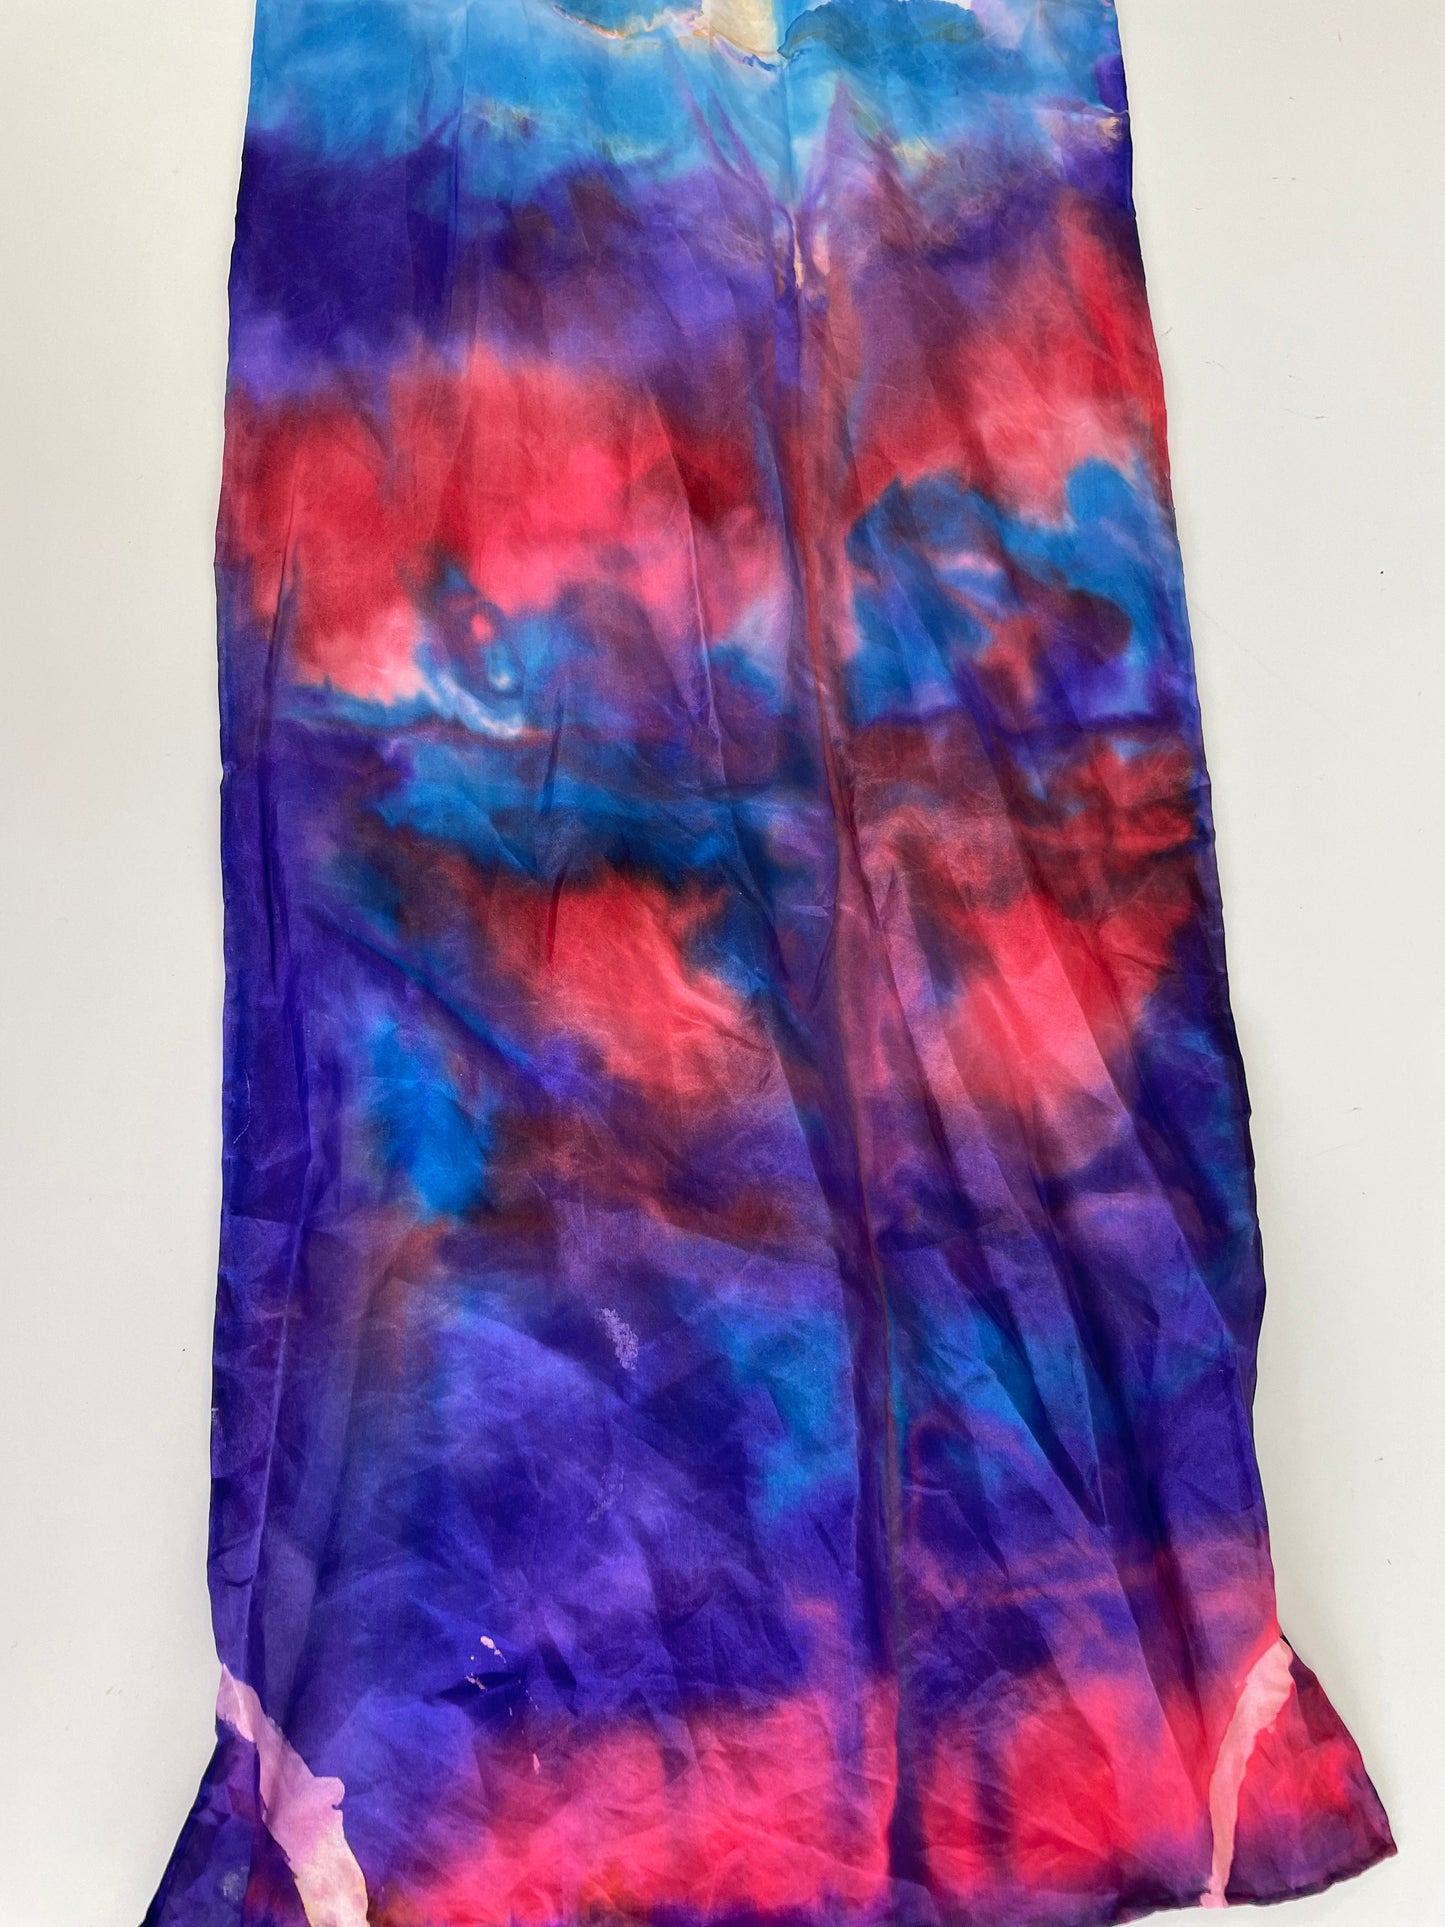 Wed, Aug 30th, 5-7p Alcohol Ink Painted Scarves Private Houston Wine and Paint Party